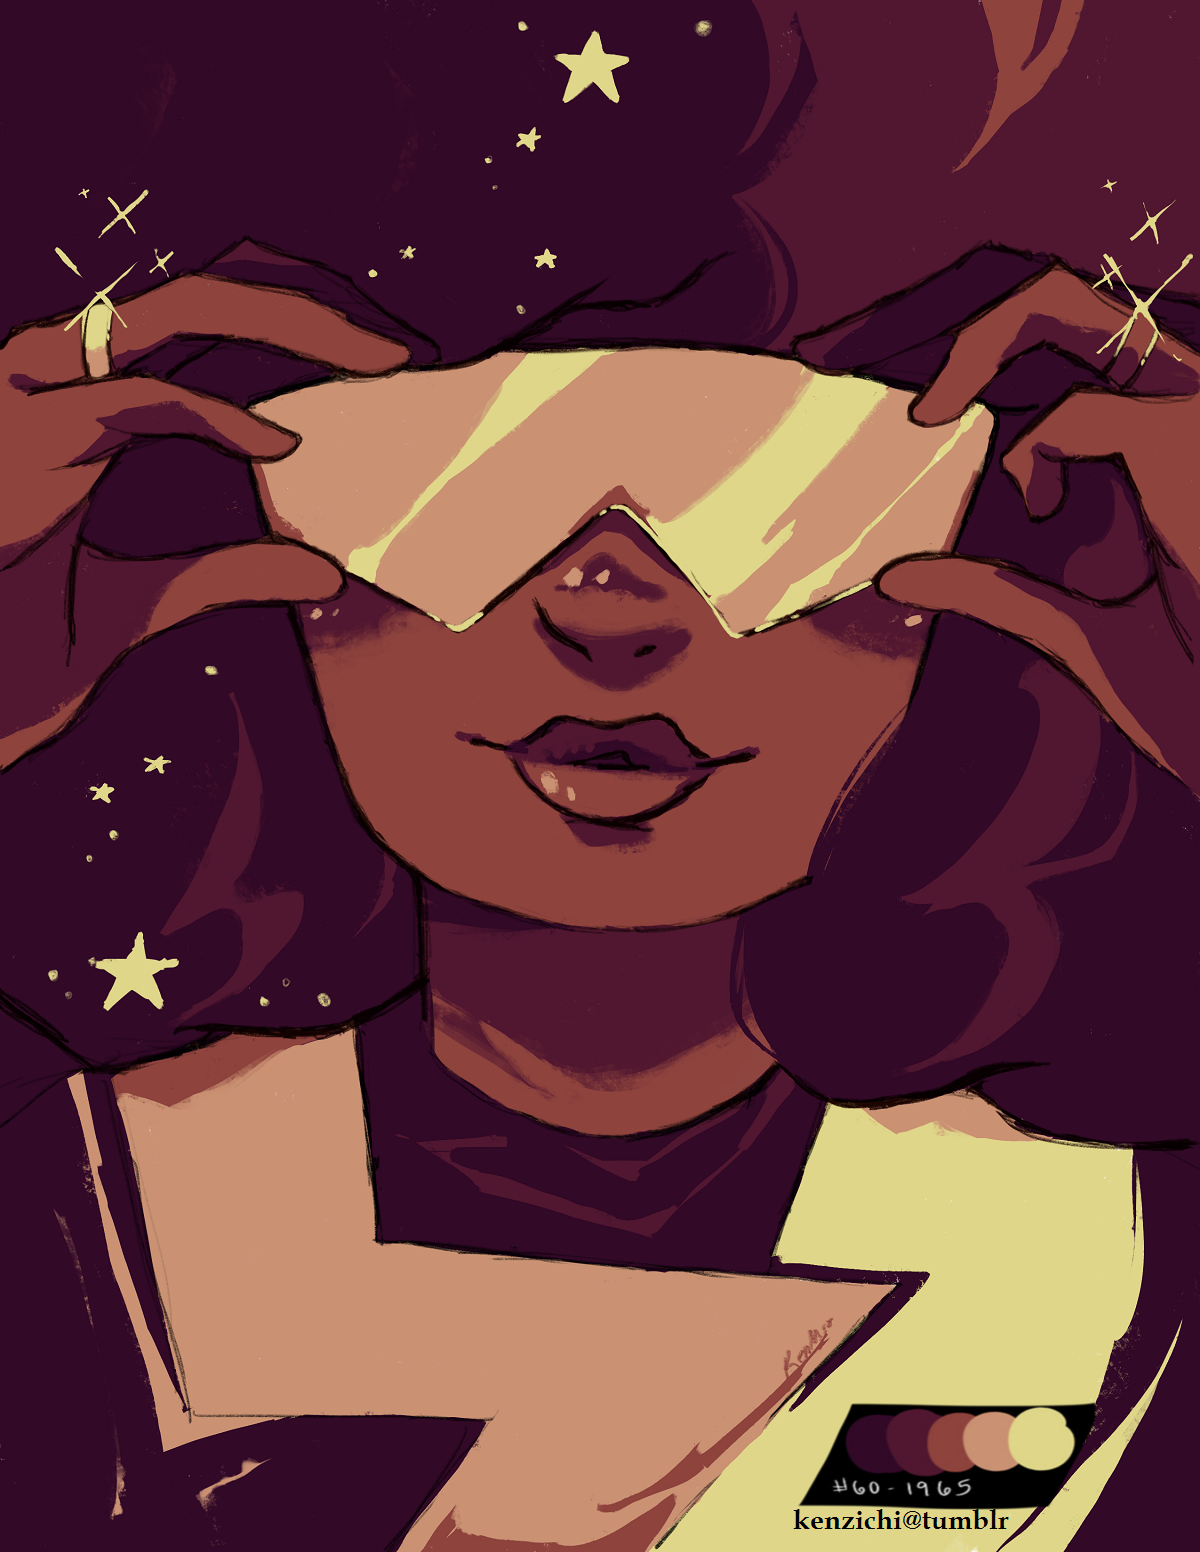 Anon asked for the #60 palette for Garnet! I guarantee you Garnet is going to adjust her visor 5x more often now just to show off those rings. Good for them!